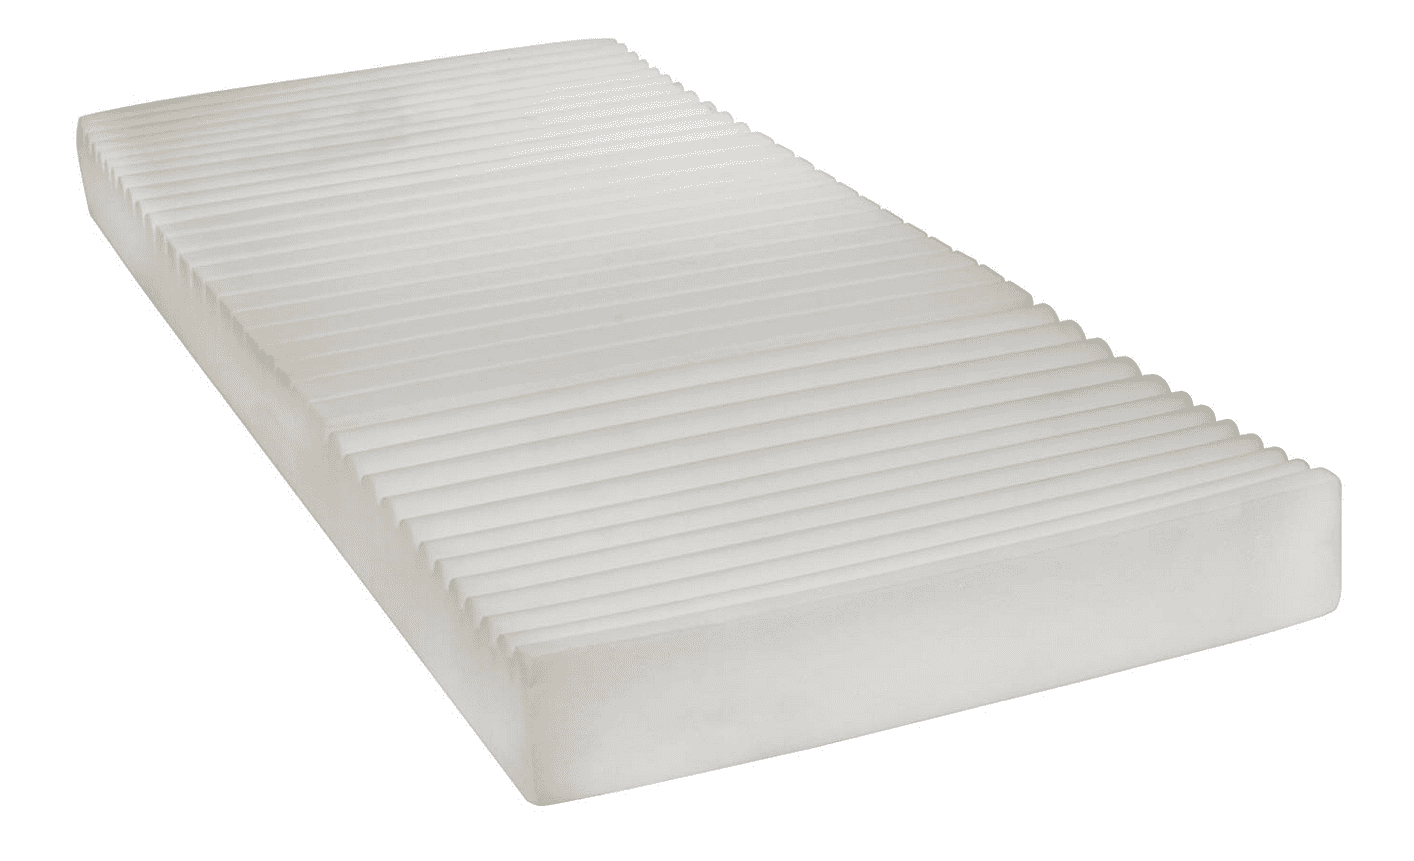 therapeutic mattress protectors that are not hot